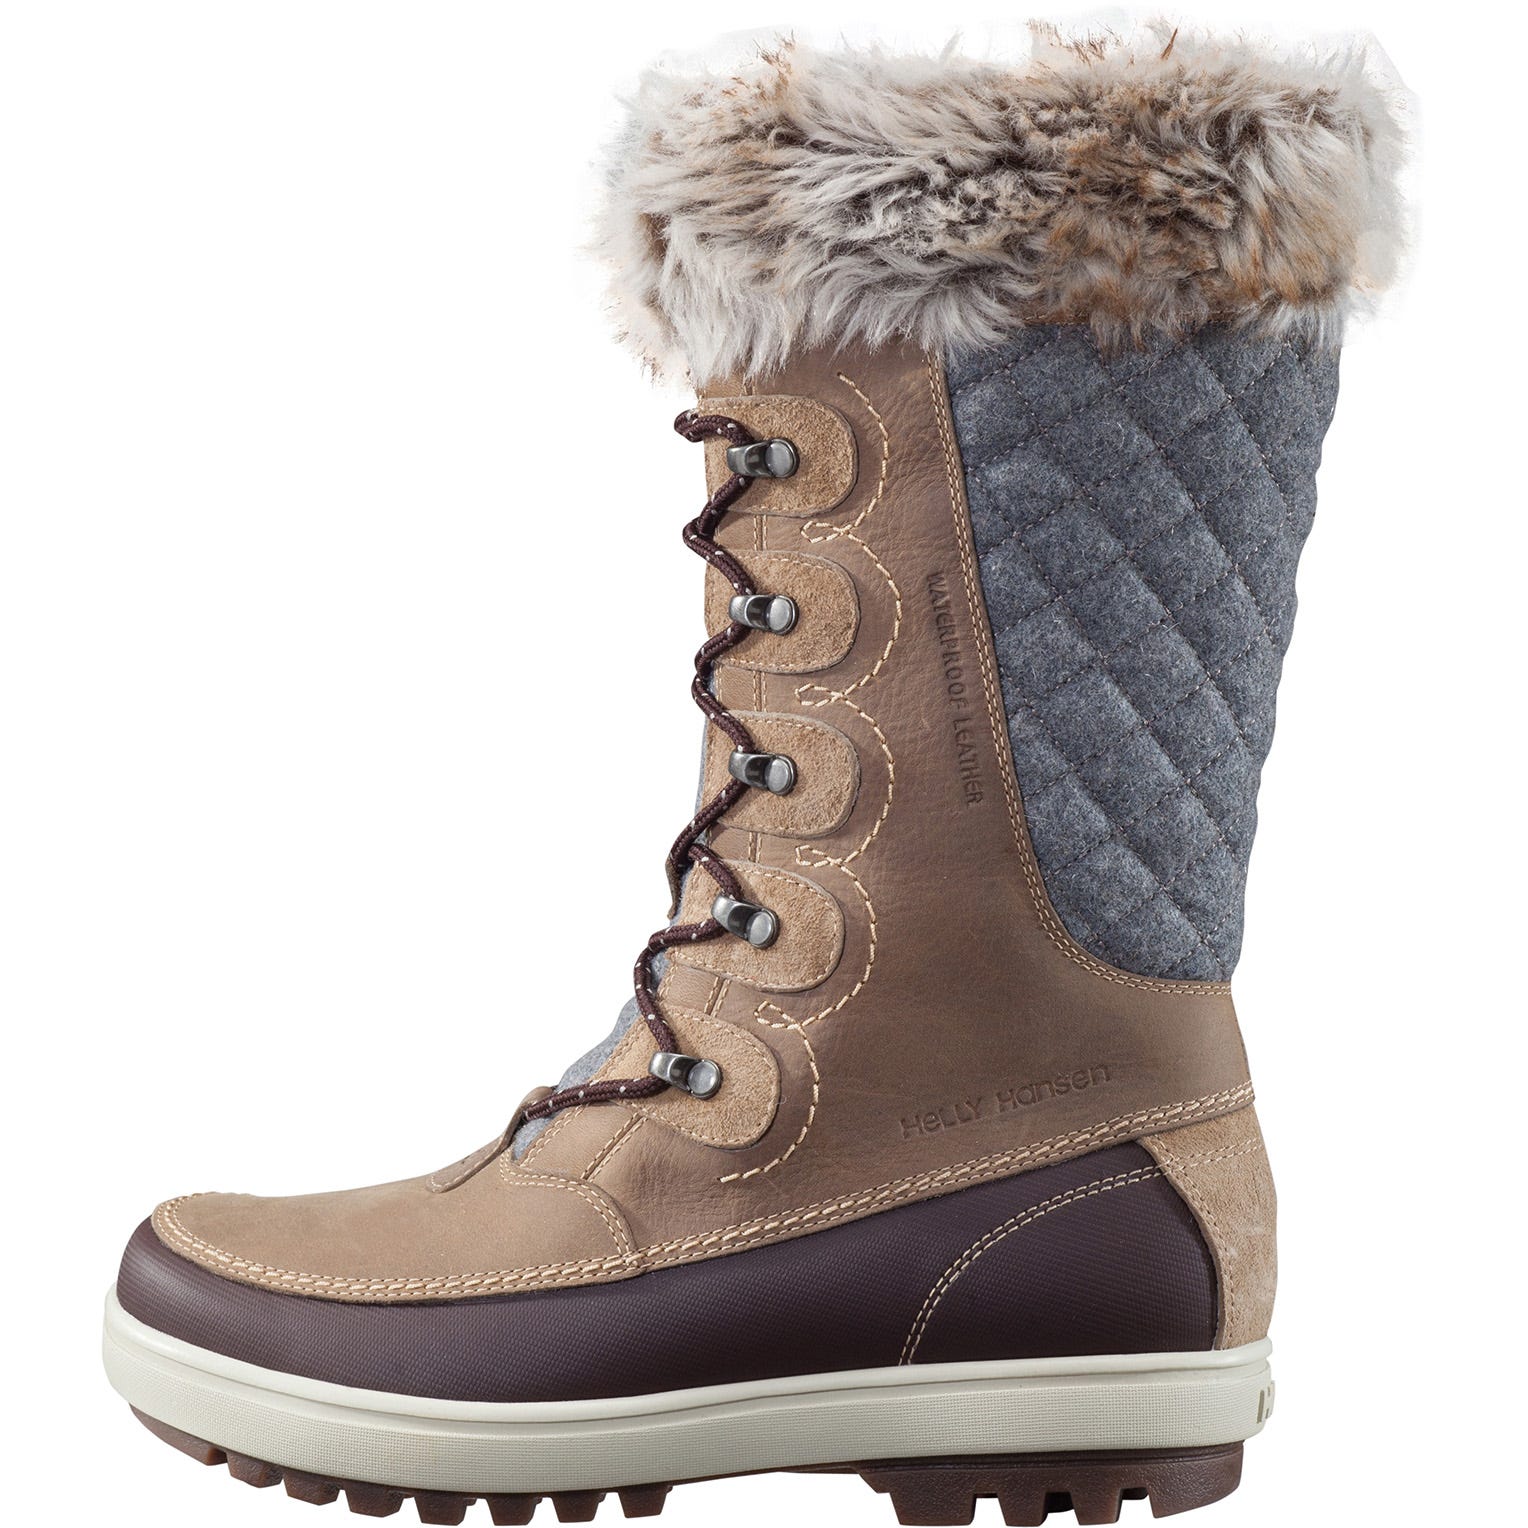 Buy > vagabond boots womens > in stock